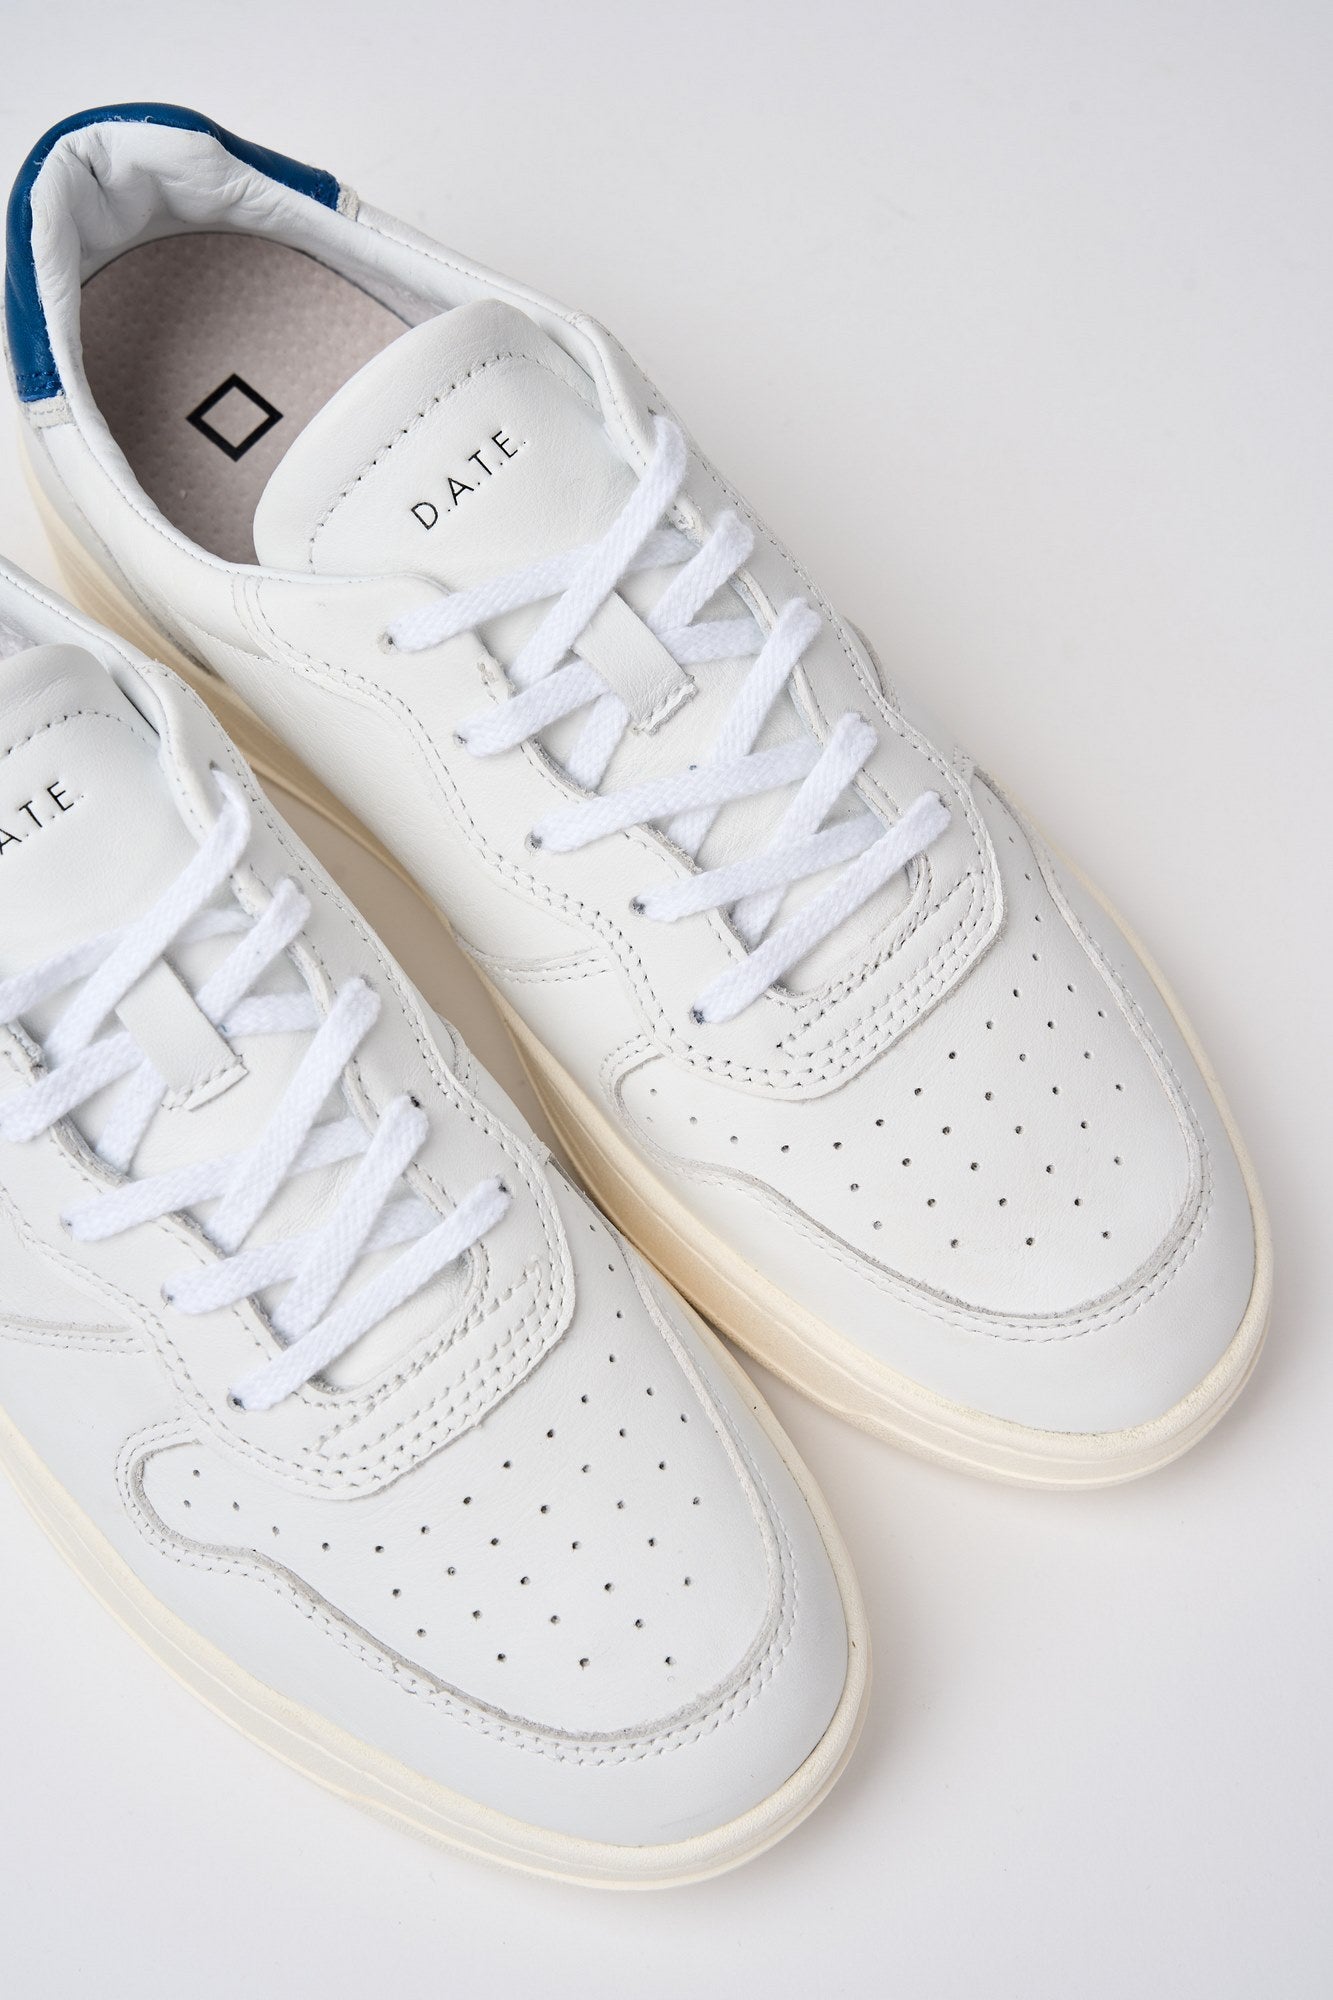 D.A.T.E. Leather Court Sneaker in White/Blue-3